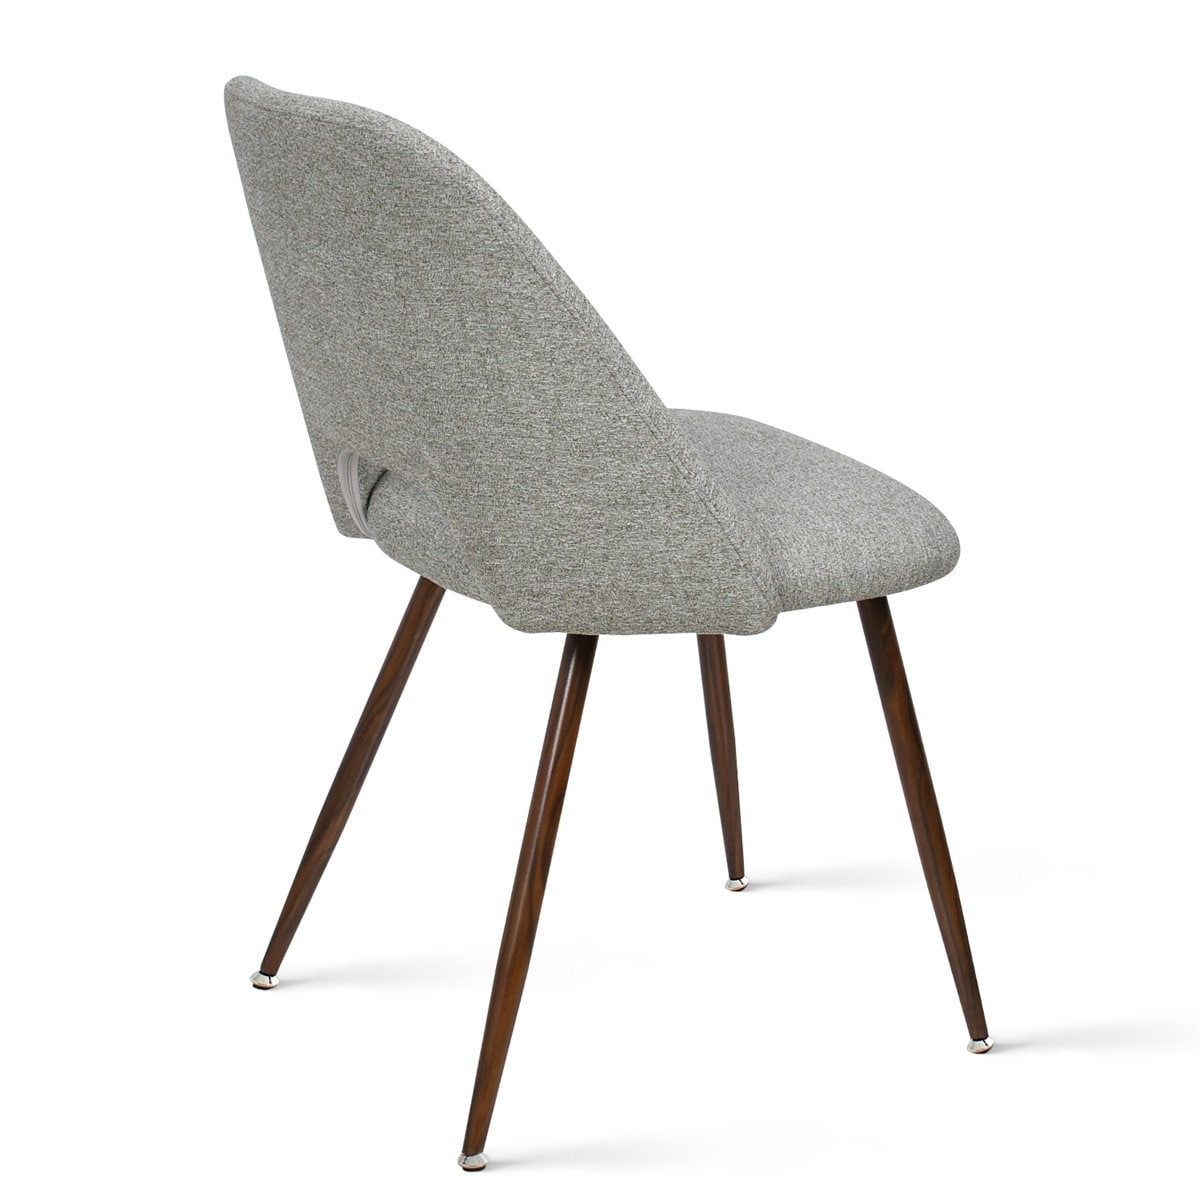 https://ak1.ostkcdn.com/images/products/is/images/direct/93bab49f319d3ec4b92bb6916b9a279693827a47/Upholstered-Modern-Cutout-Back-Dining-Chair-with-Walnut-Leg%EF%BC%88Set-of-4%29.jpg